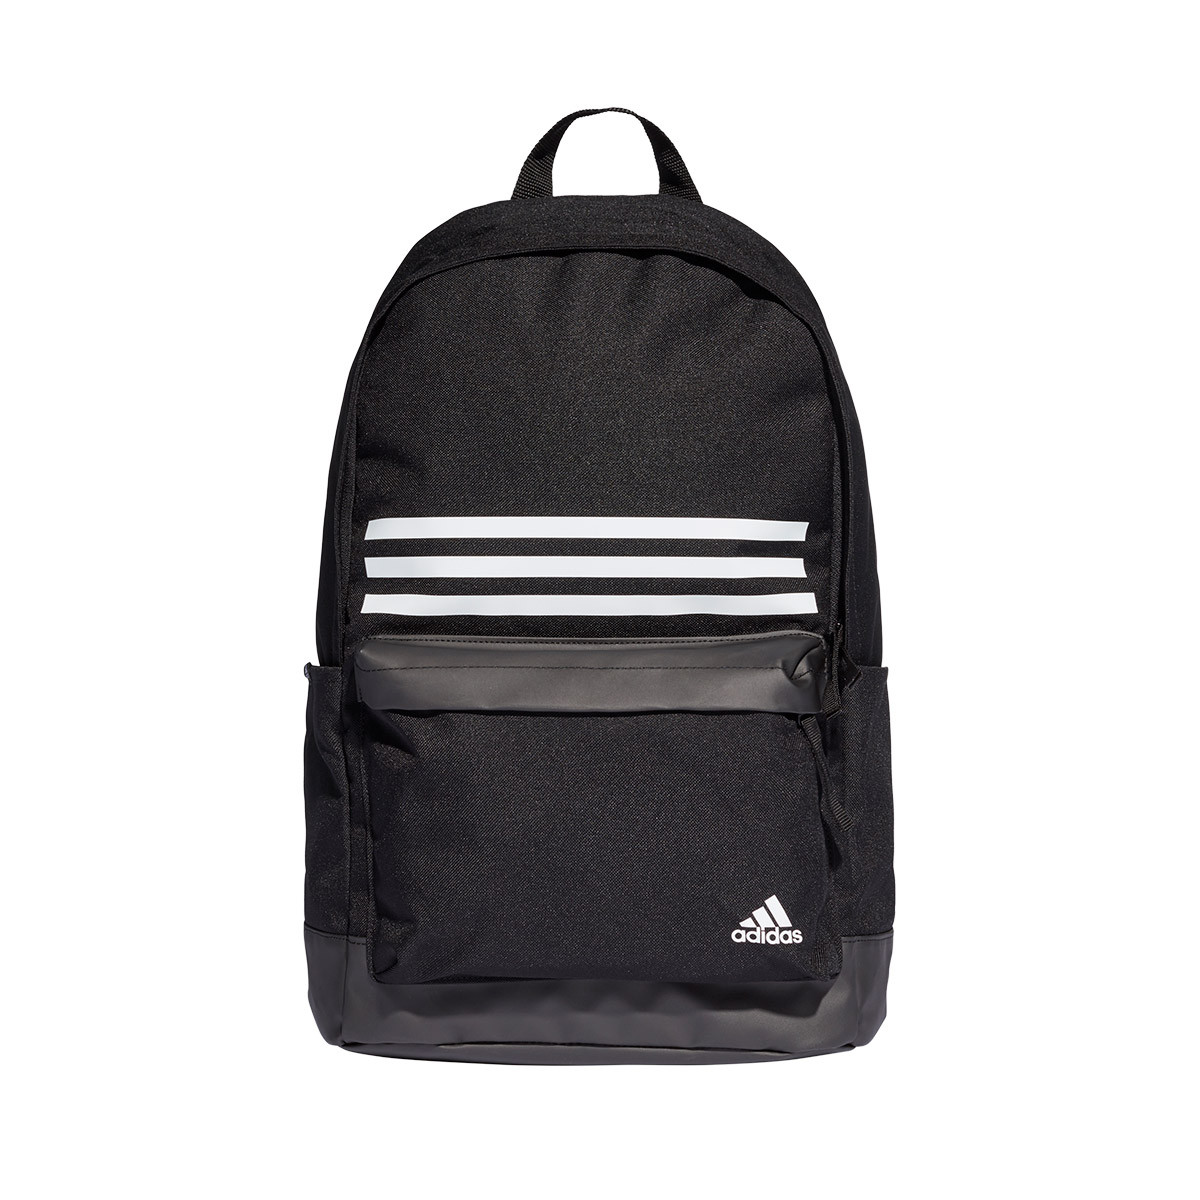 adidas classic backpack 3s